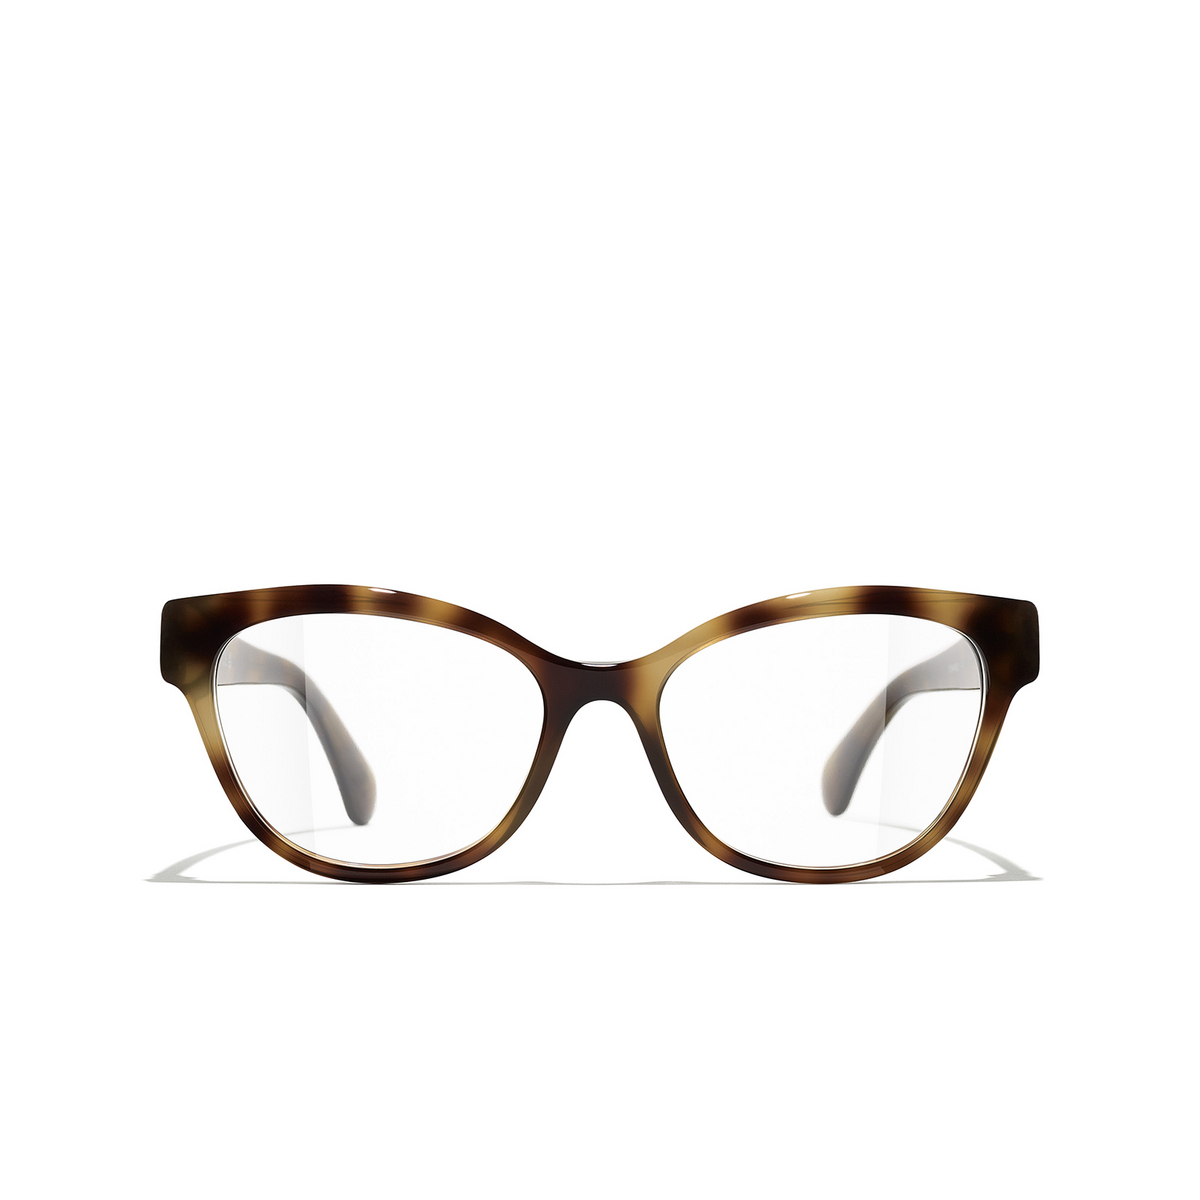 CHANEL butterfly Eyeglasses 1717 Tortoise - front view